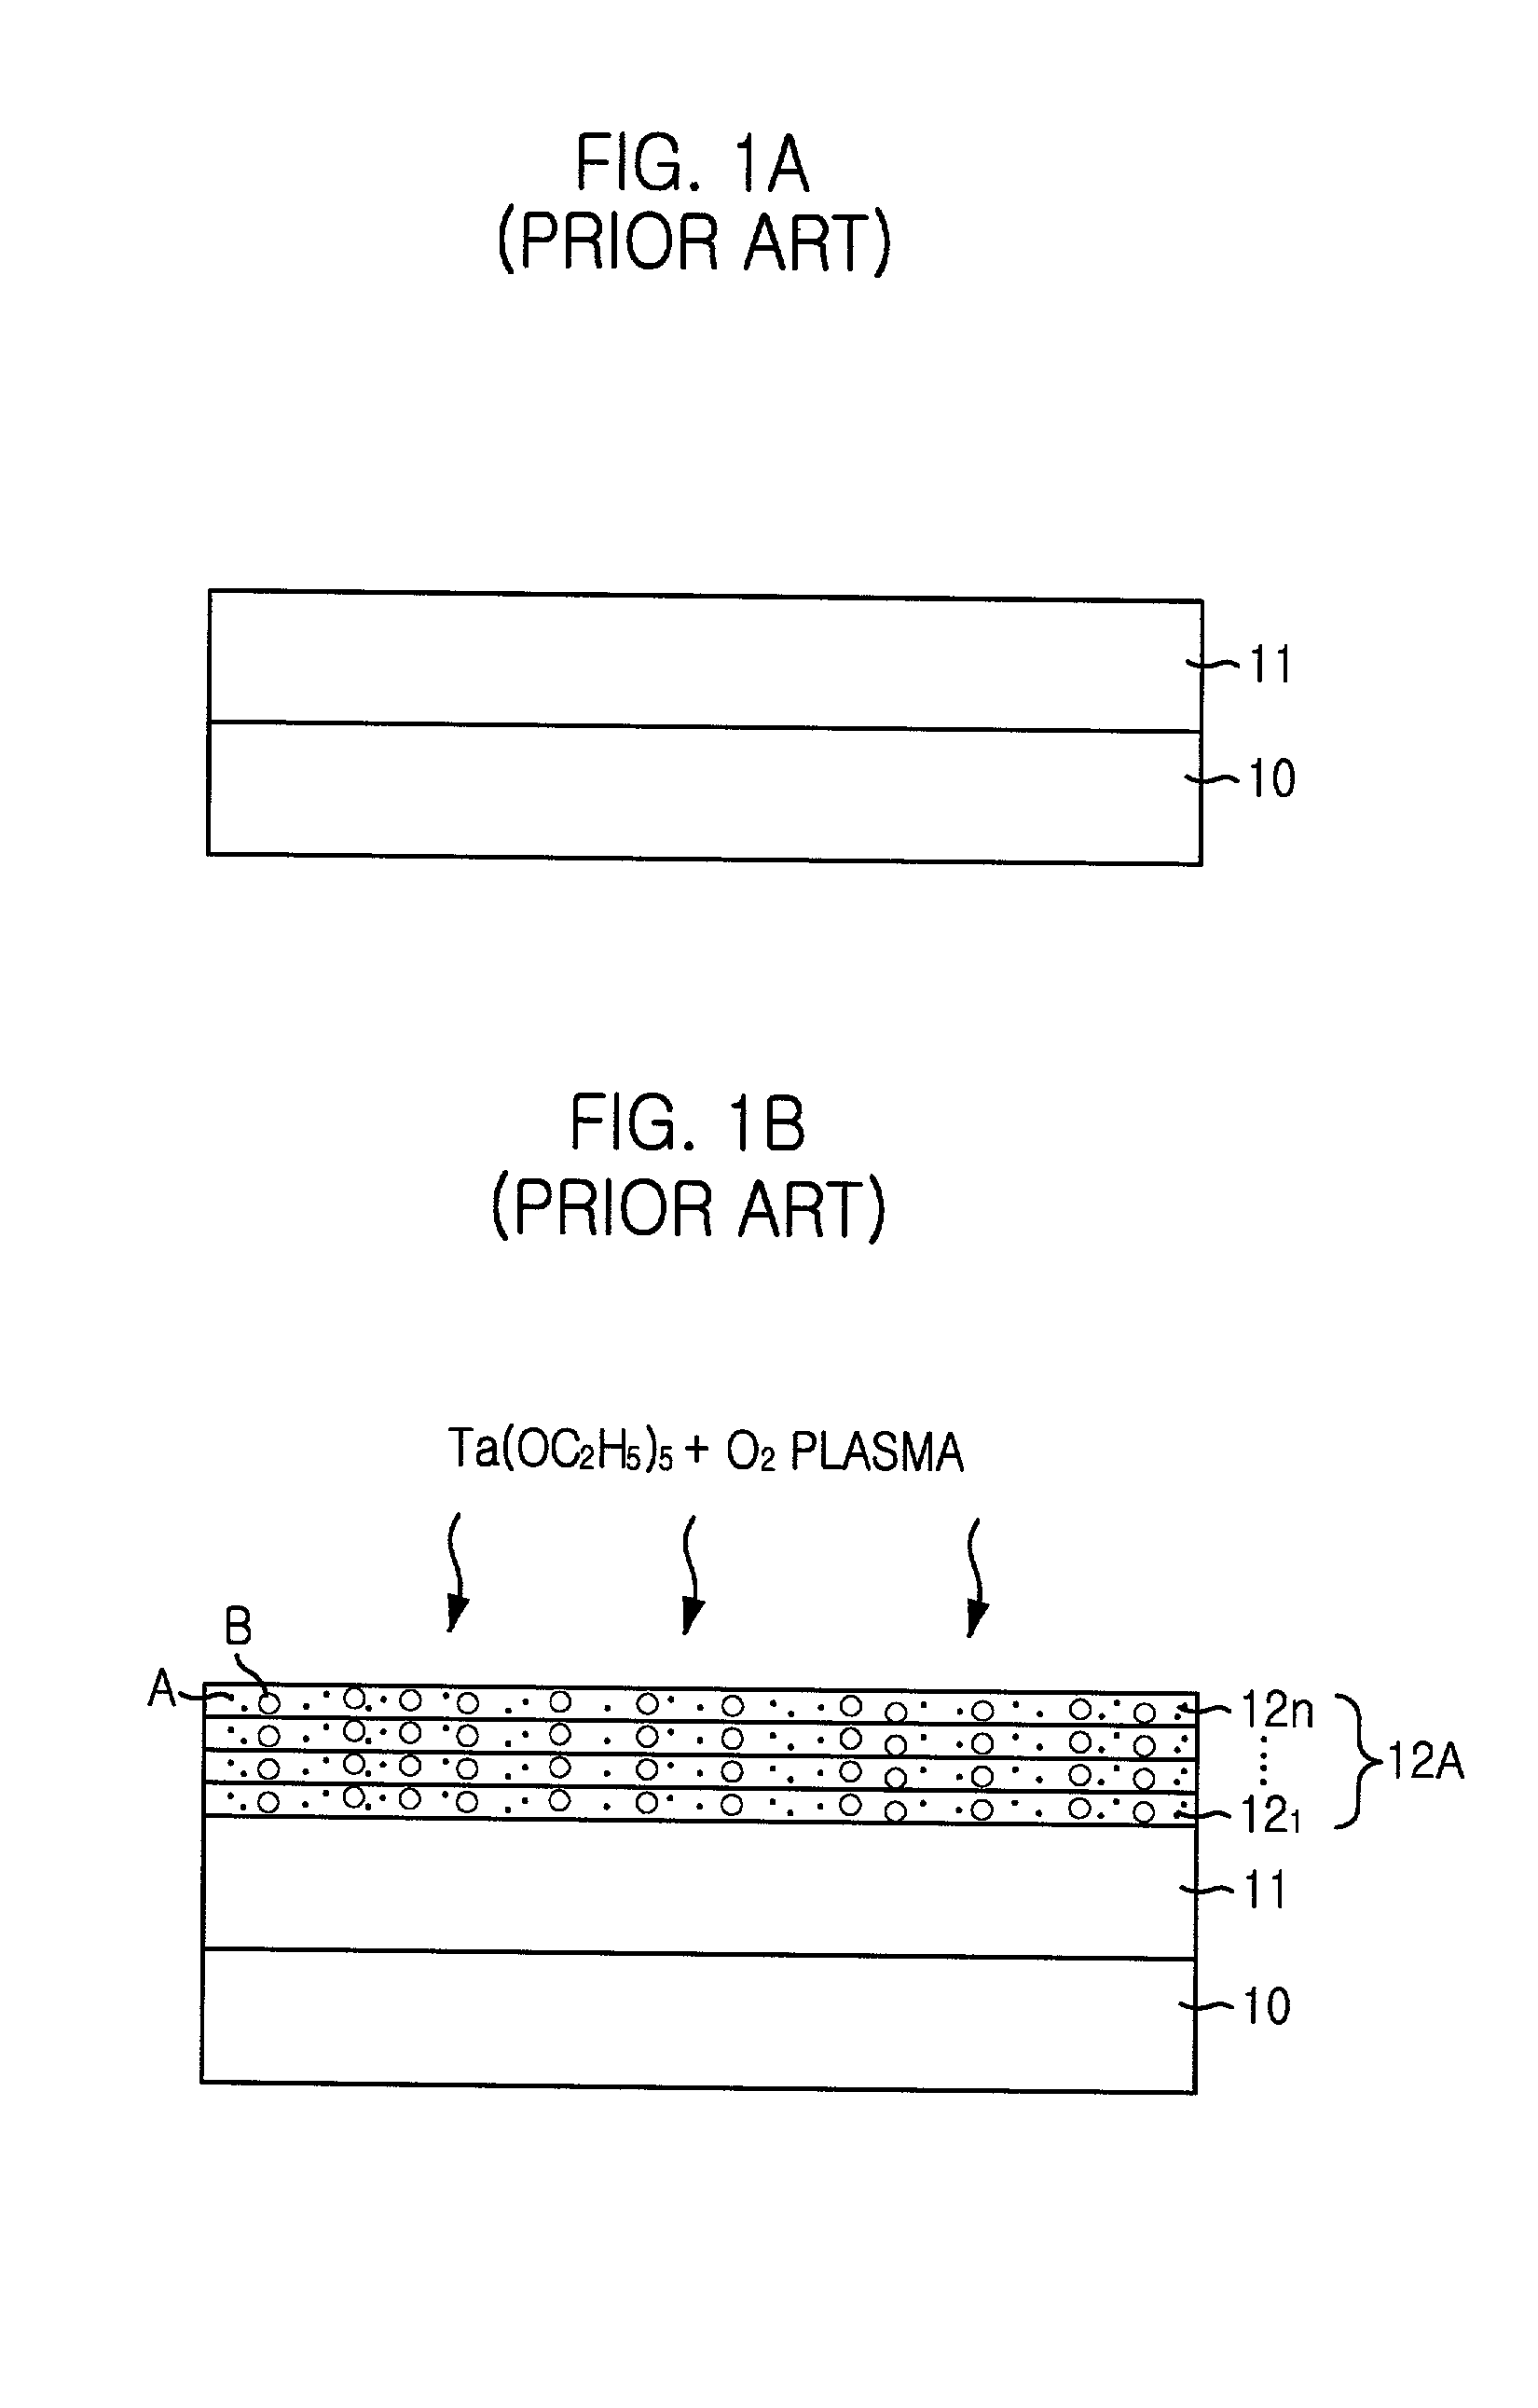 Method for forming Ta2O5 dielectric layer using plasma enhanced atomic layer deposition